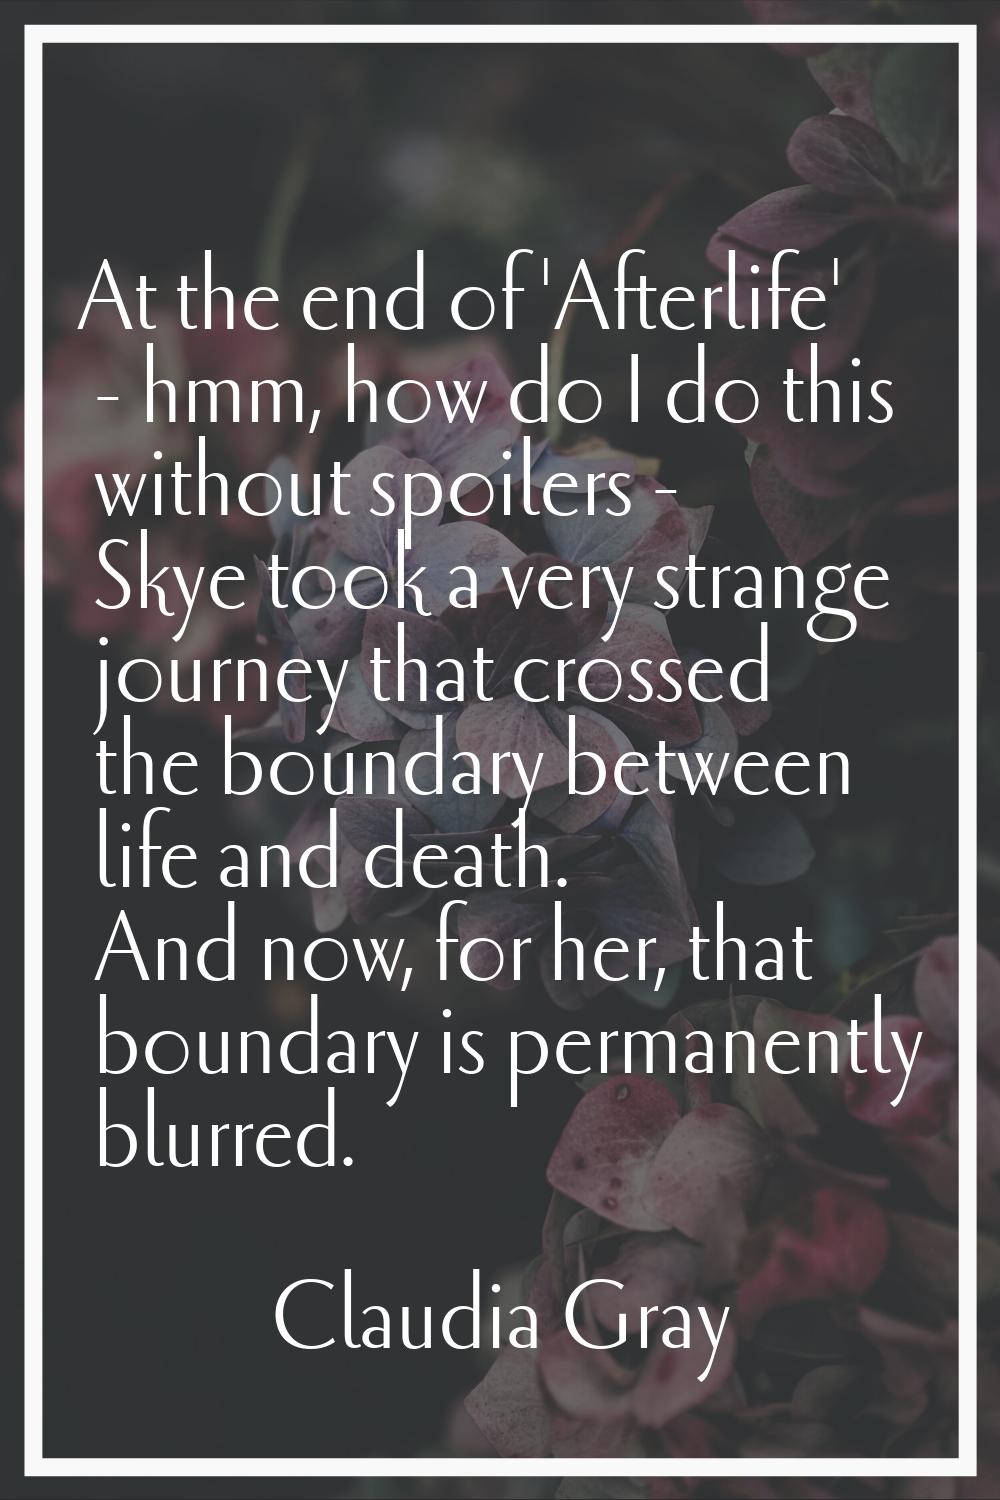 At the end of 'Afterlife' - hmm, how do I do this without spoilers - Skye took a very strange journ